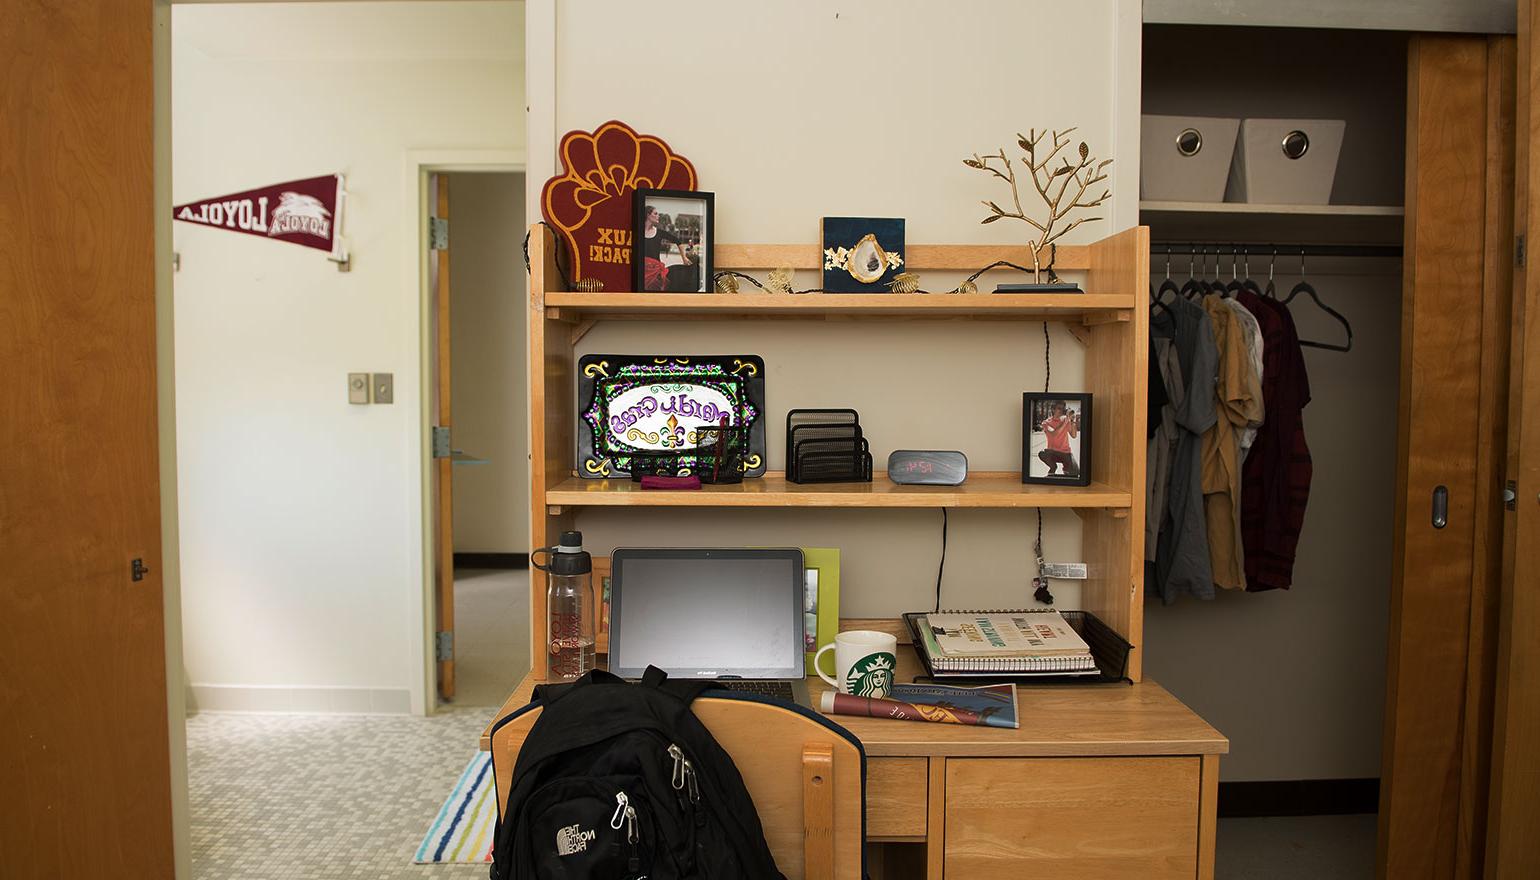 View of desk space and hallway in dorm